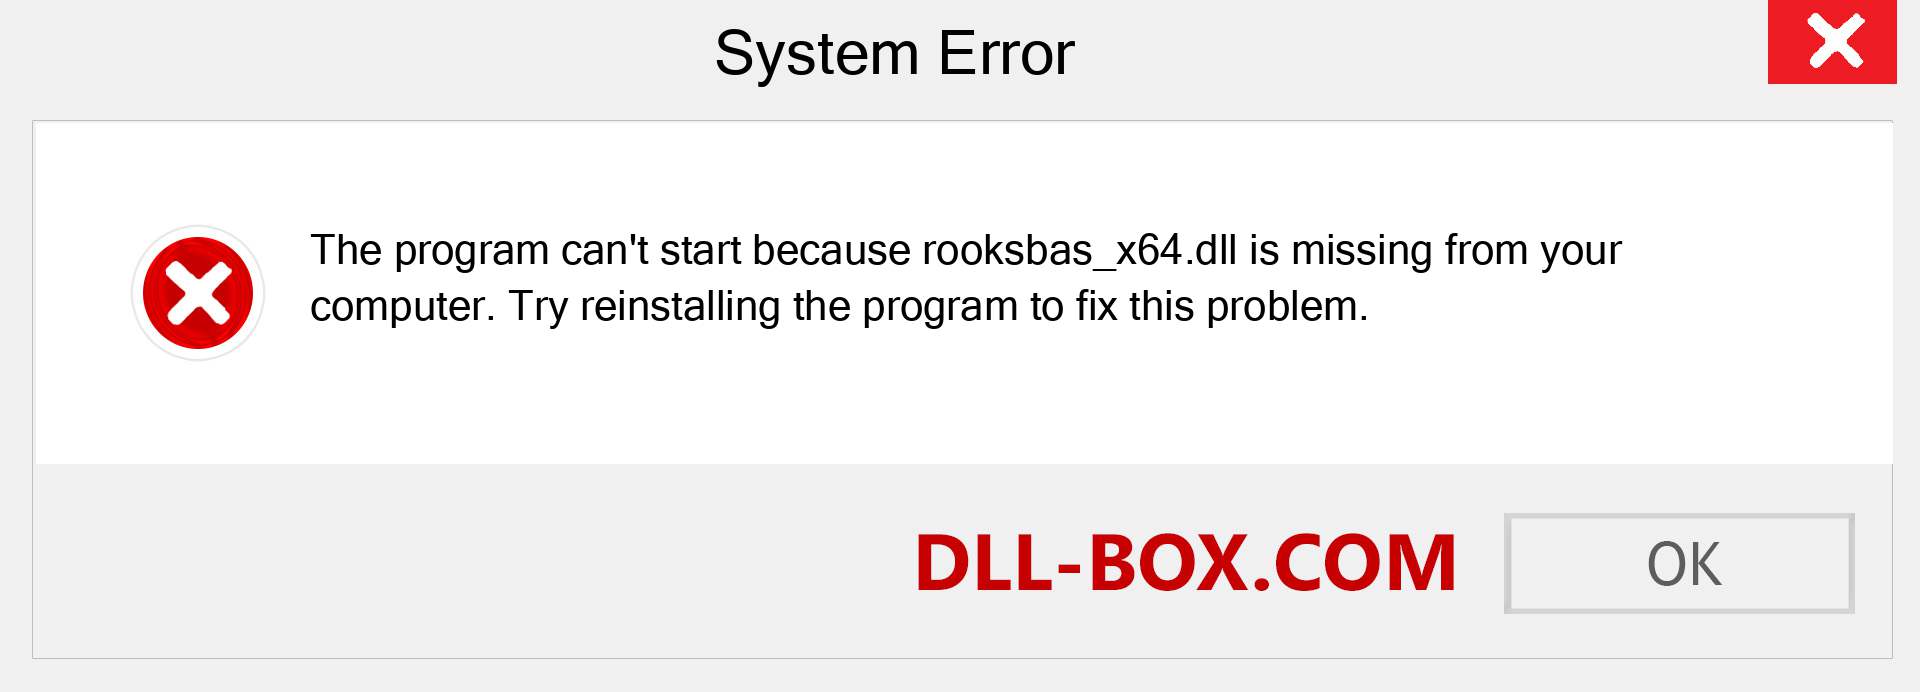  rooksbas_x64.dll file is missing?. Download for Windows 7, 8, 10 - Fix  rooksbas_x64 dll Missing Error on Windows, photos, images